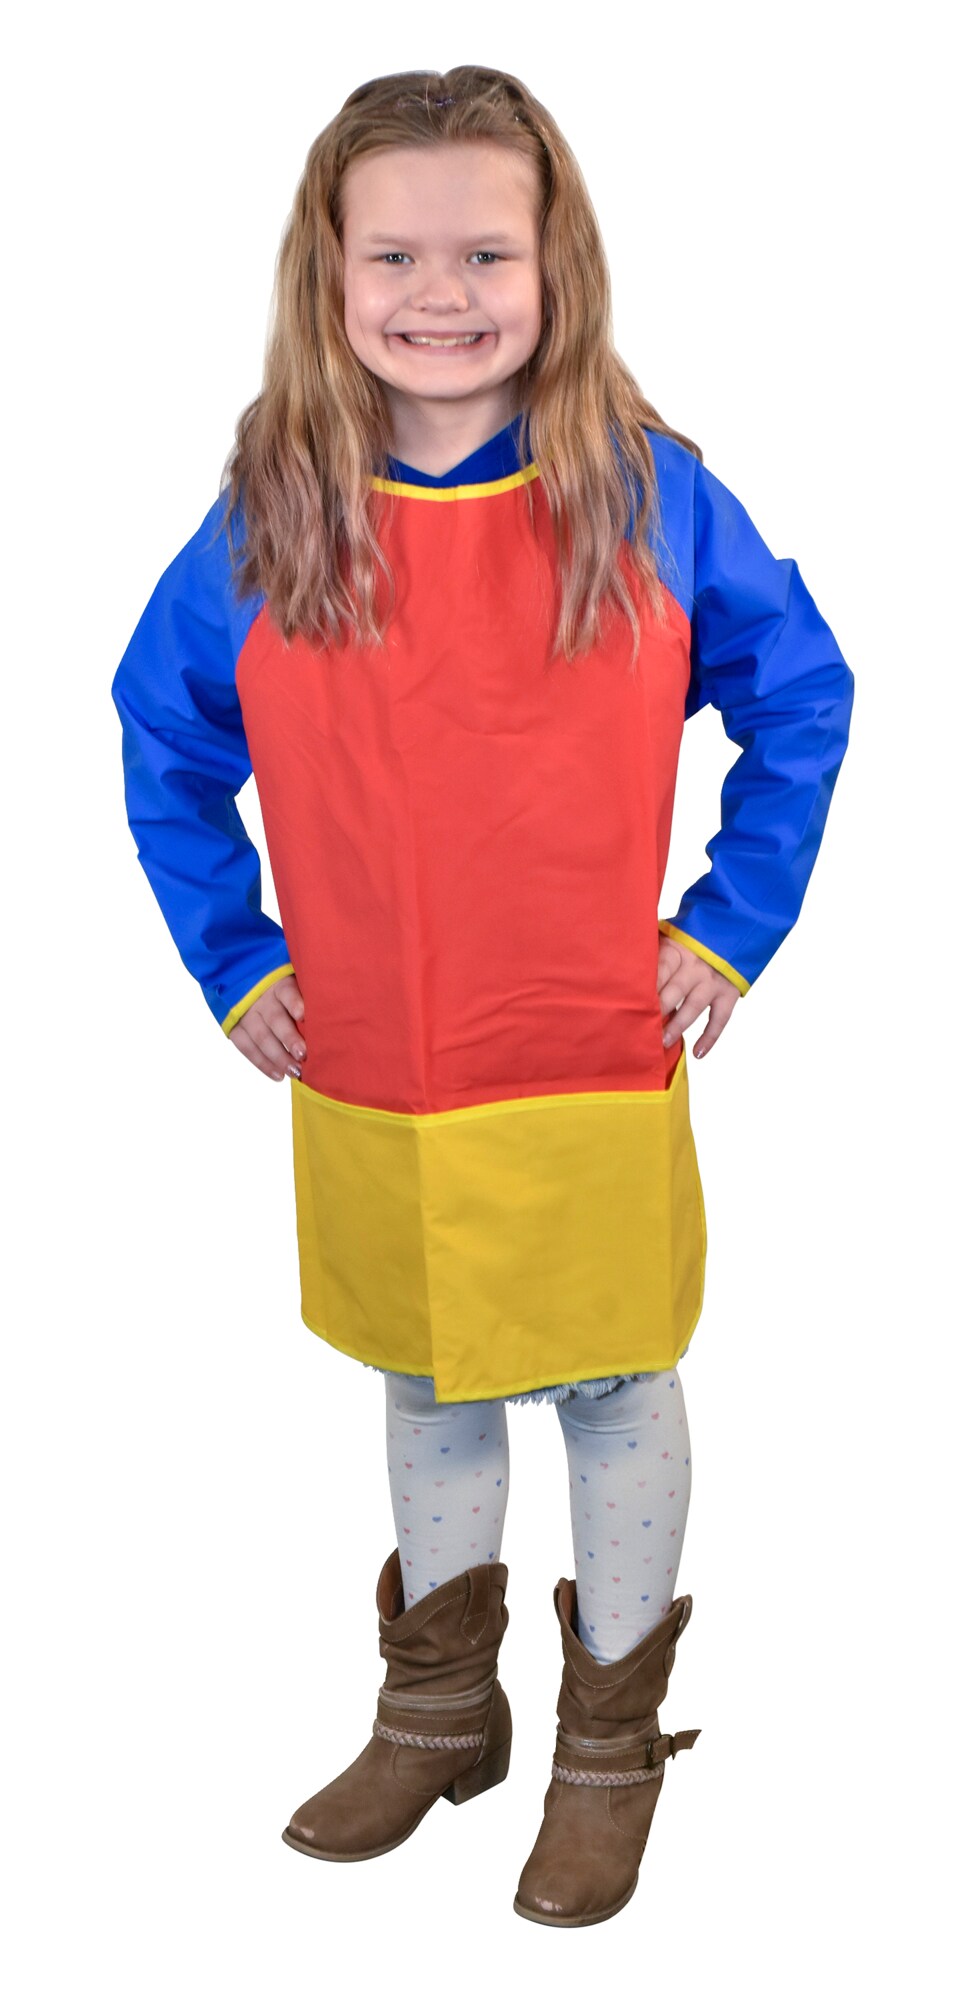 School Smart Kid&#x27;s Vinyl Smock with Sleeves, Full Protection, 25 x 22 Inches